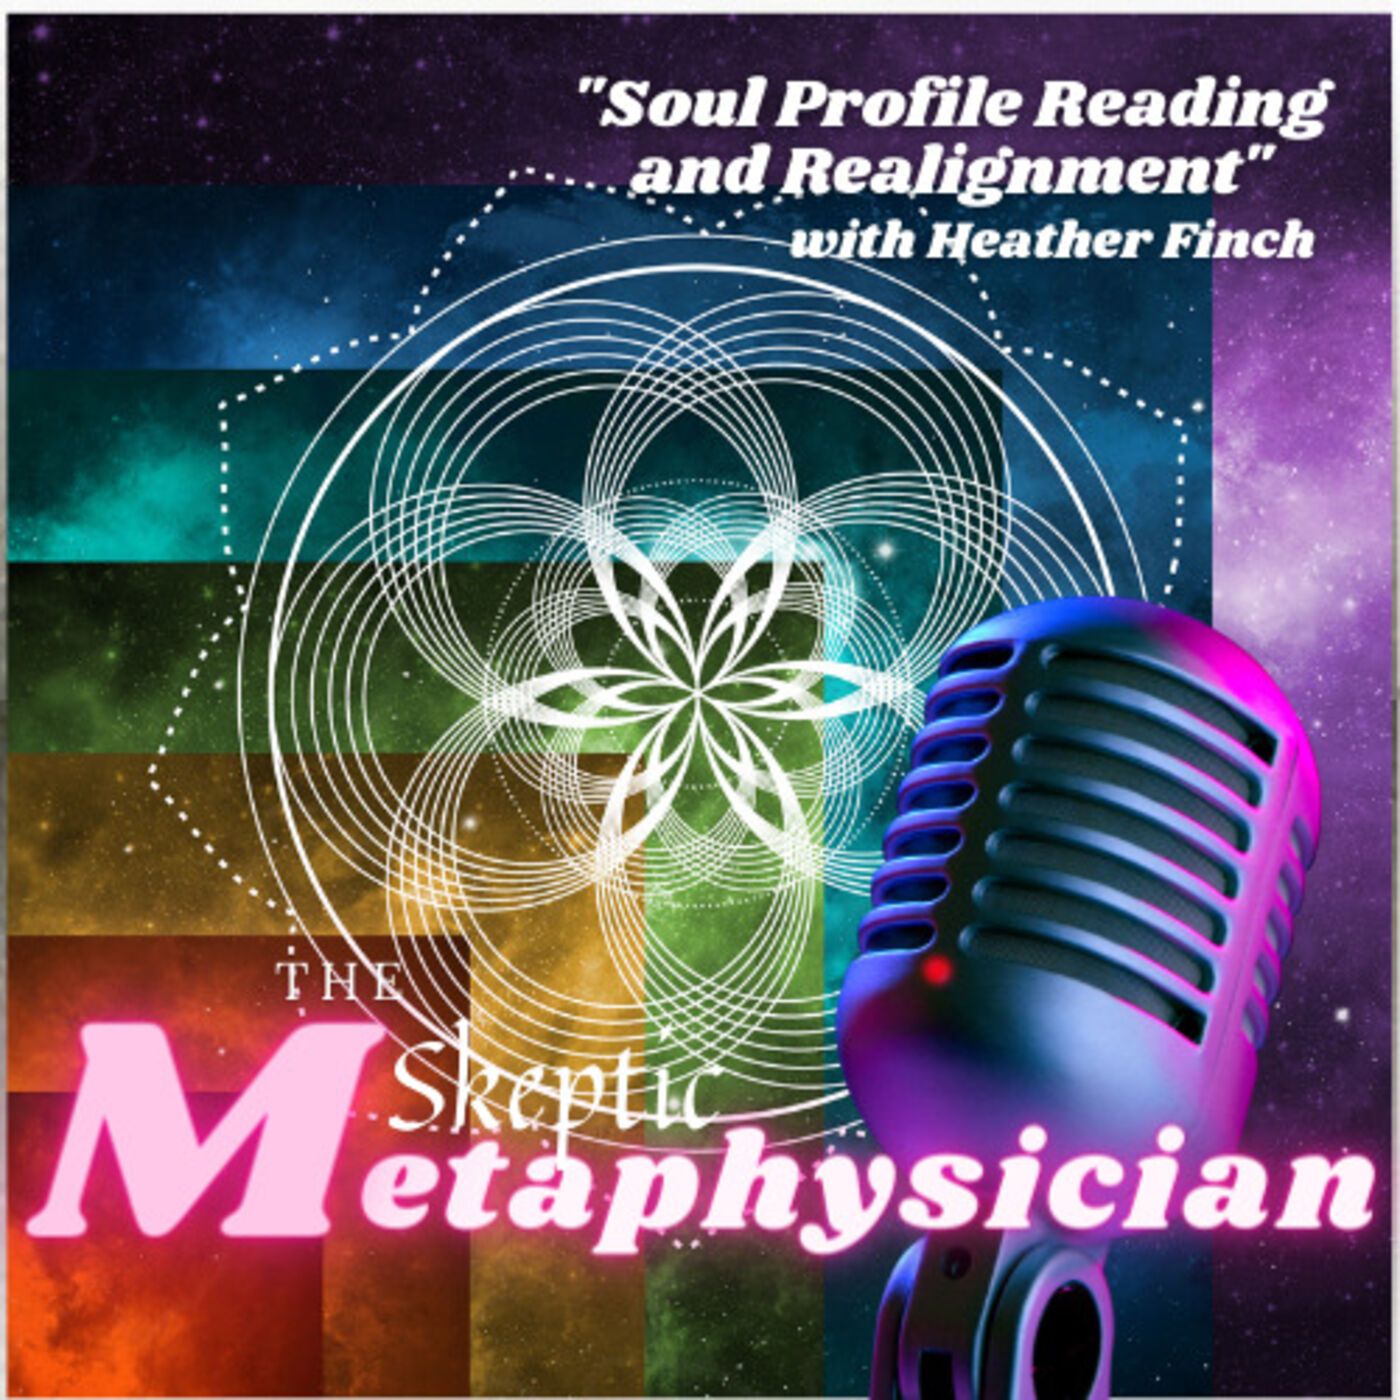 Soul Profile Reading and Realignment | Heather Finch Image